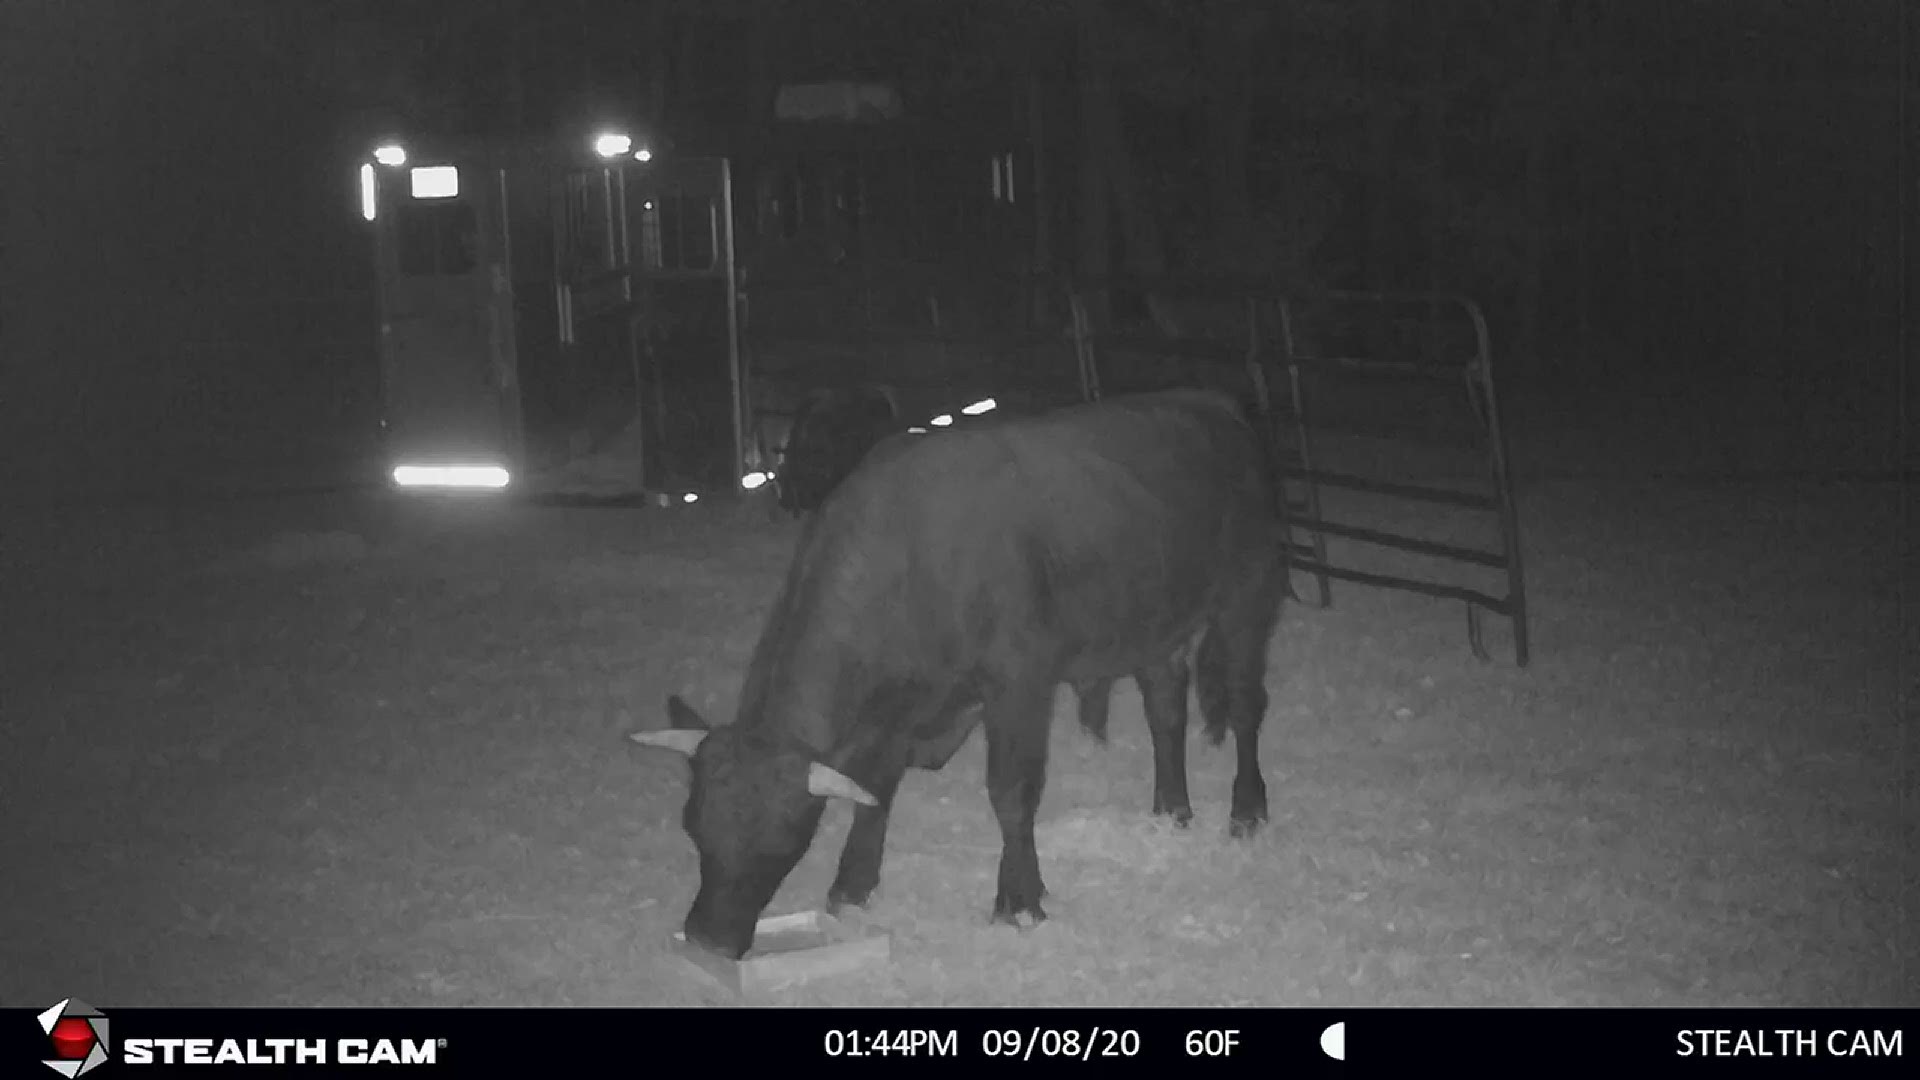 The Beefalo has been on the run since August. Police said on Tuesday they have raised enough money to buy the animal and send him to an animal sanctuary.